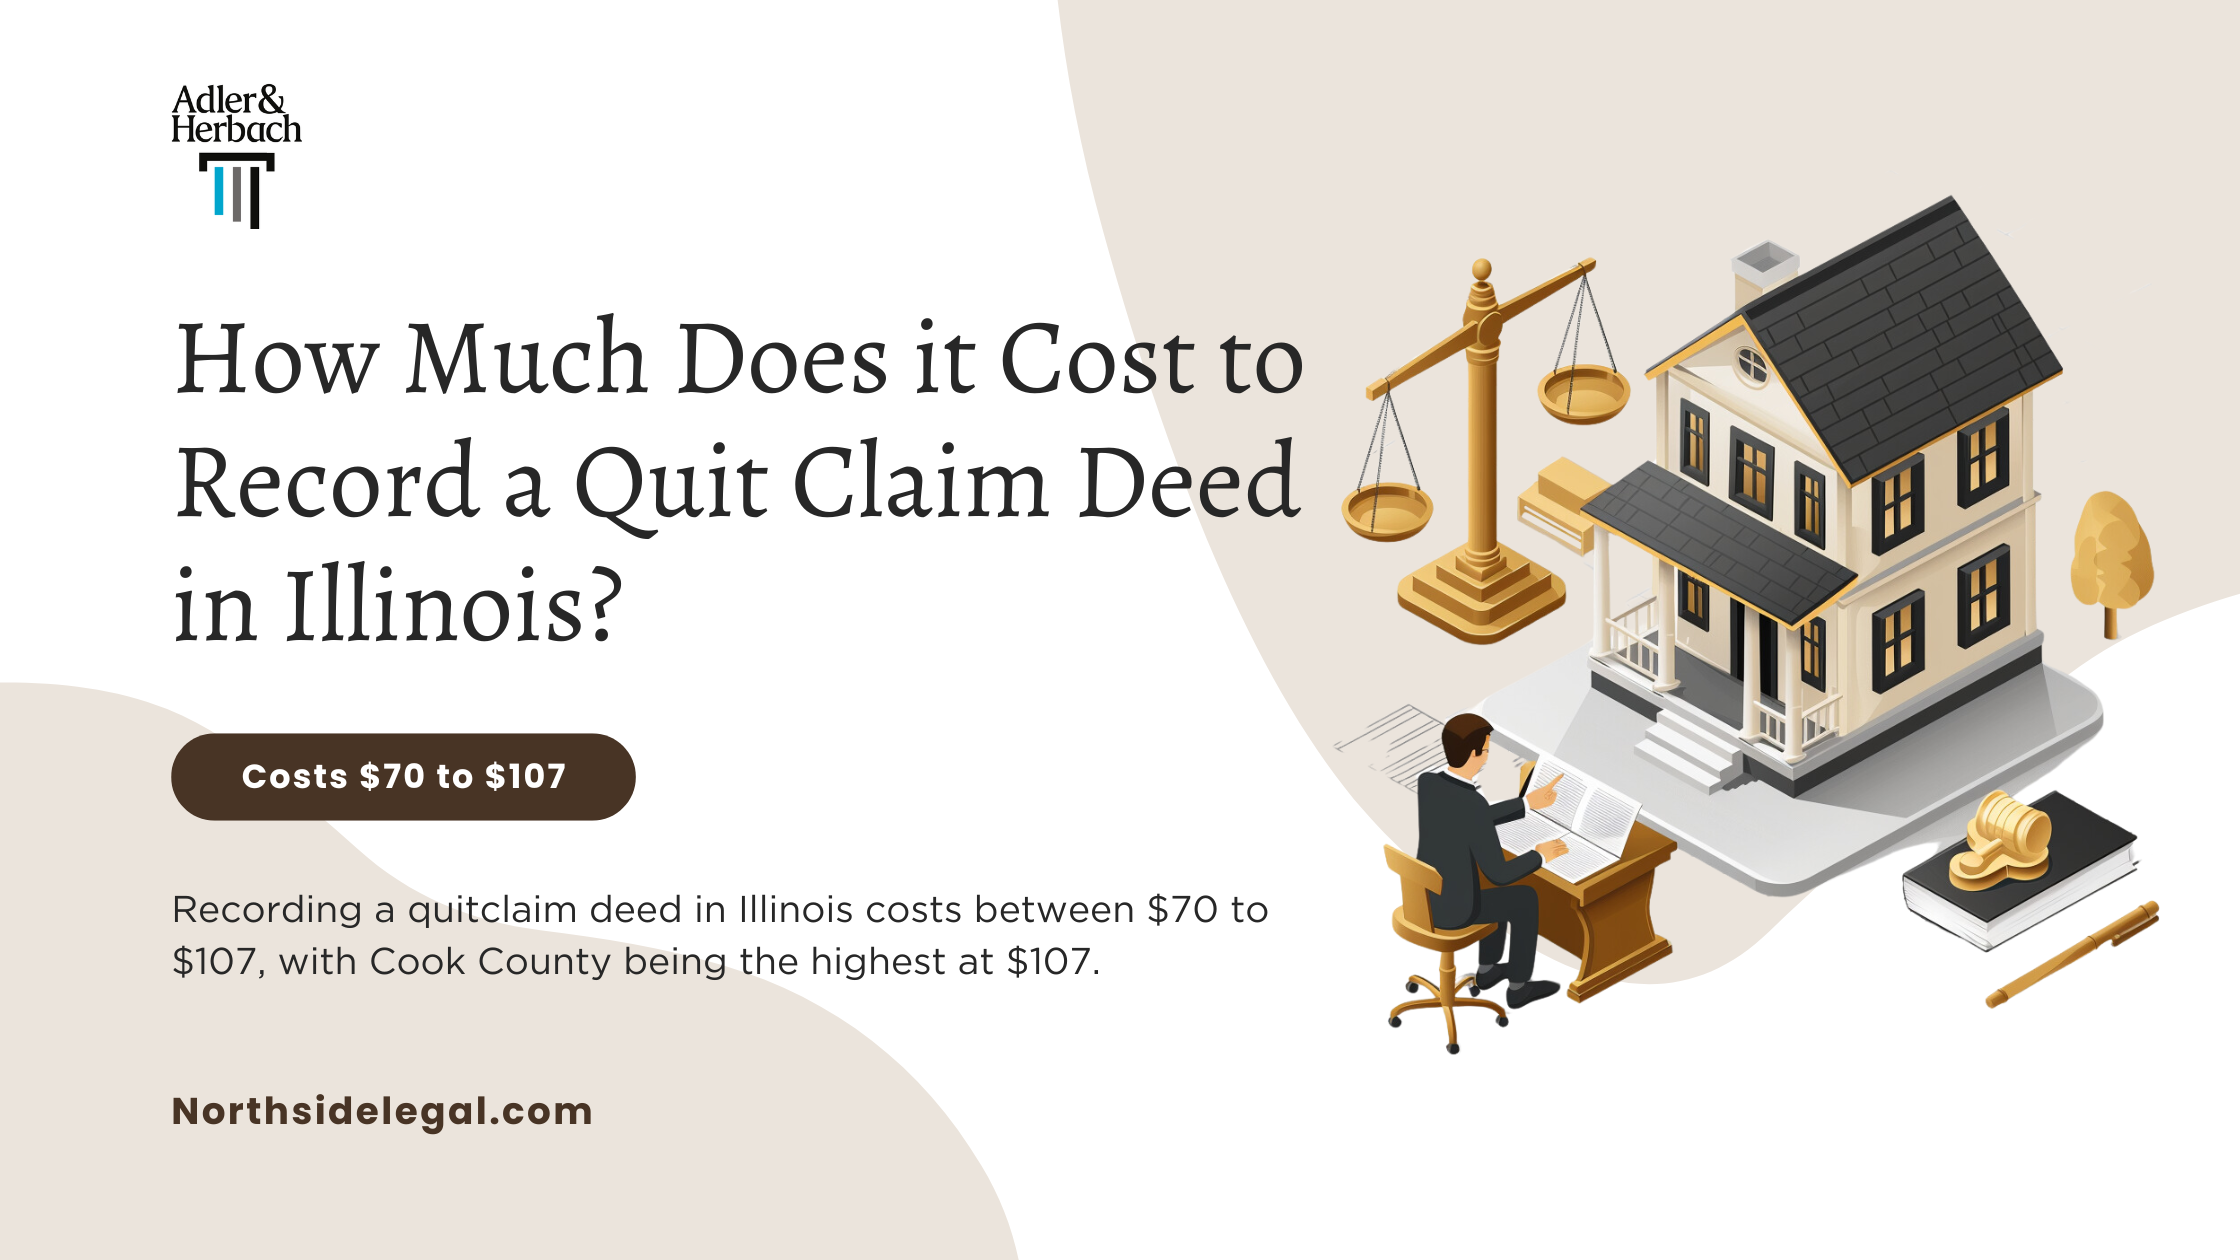 How Much Does it Cost to Record a Quit Claim Deed in Illinois?